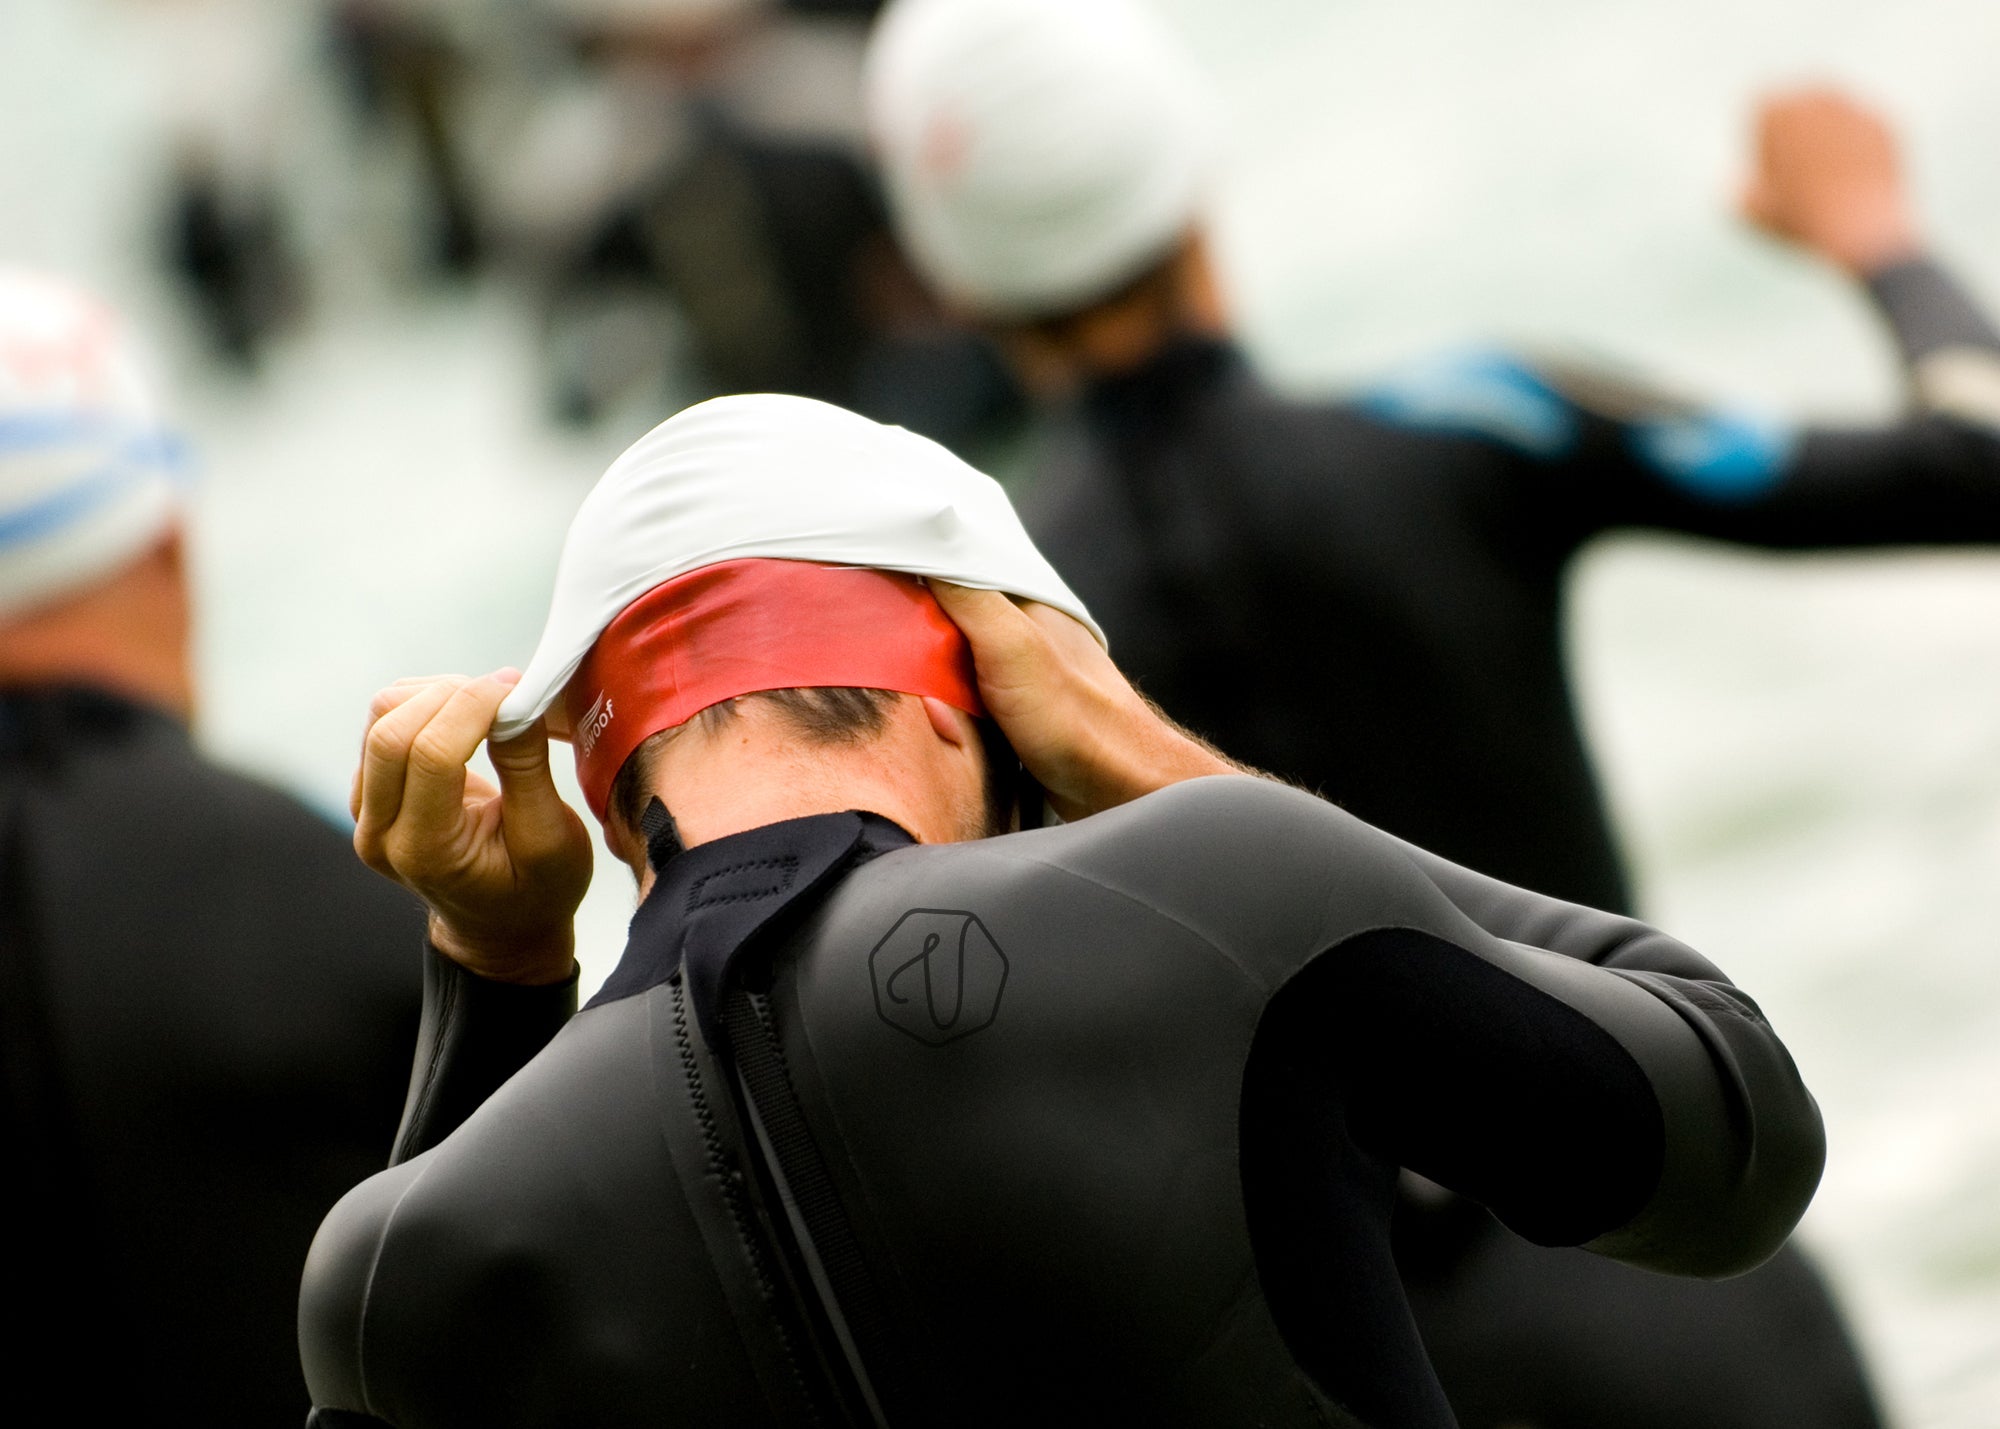 10 things often overlooked when starting an Ironman training plan